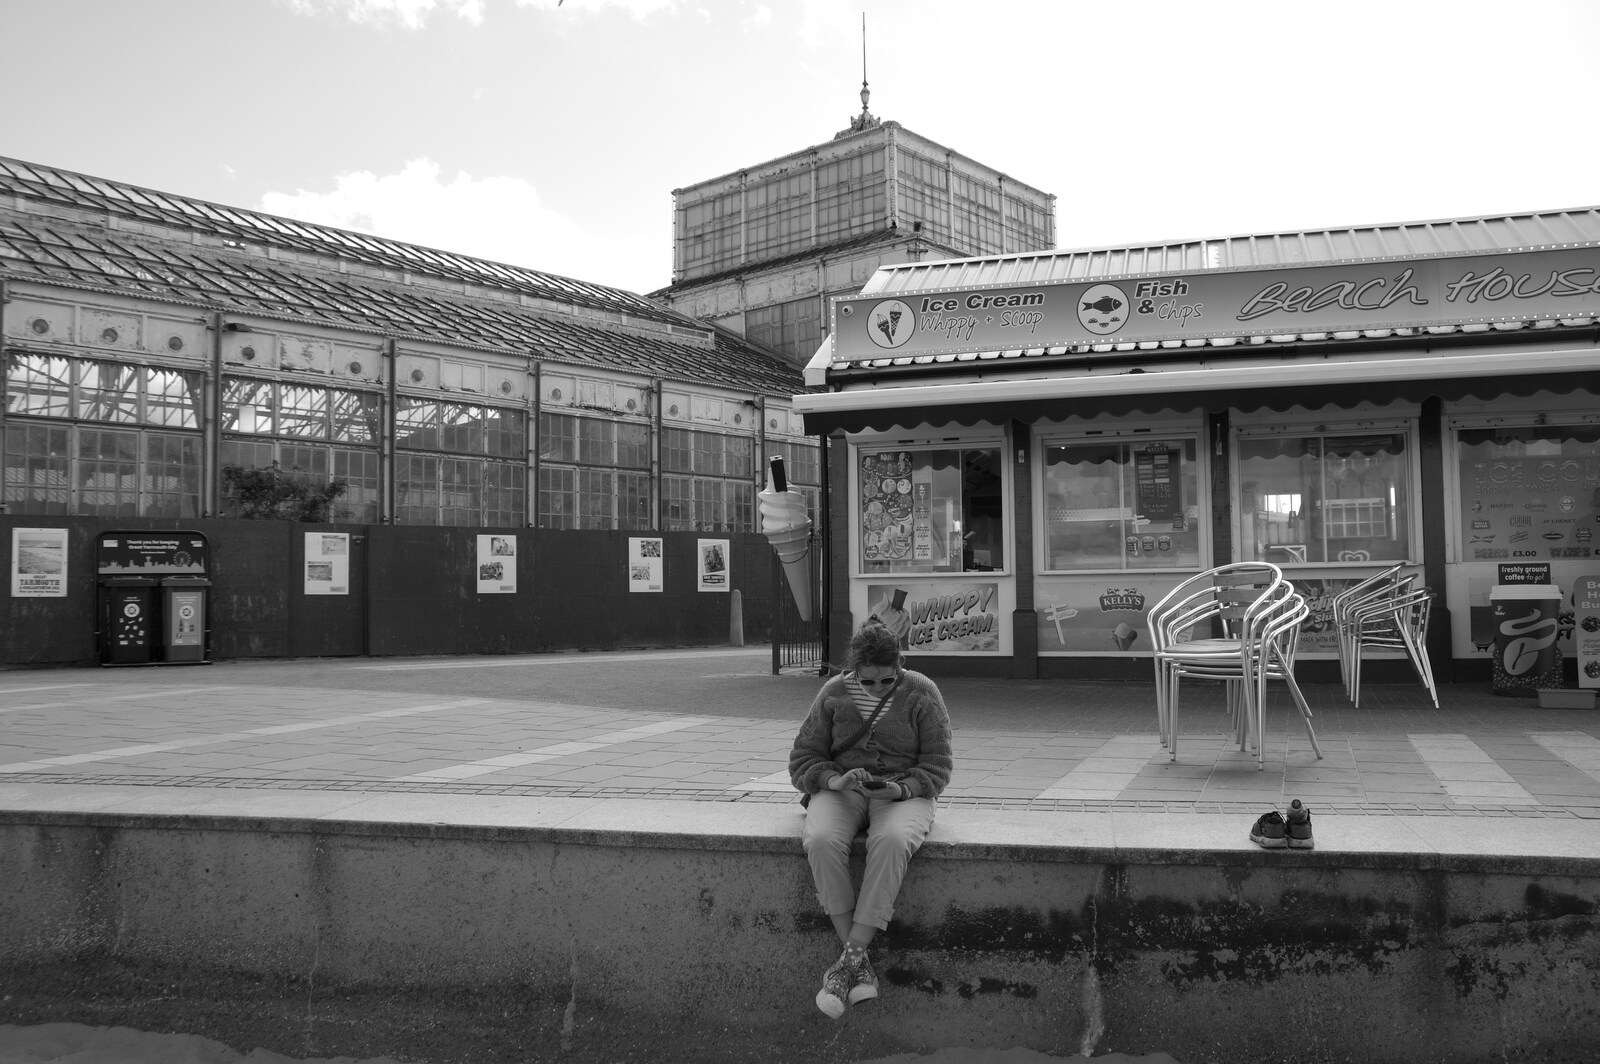 Isobel checks her phone from Faded Seaside Glamour: A Weekend in Great Yarmouth, Norfolk - 29th May 2022